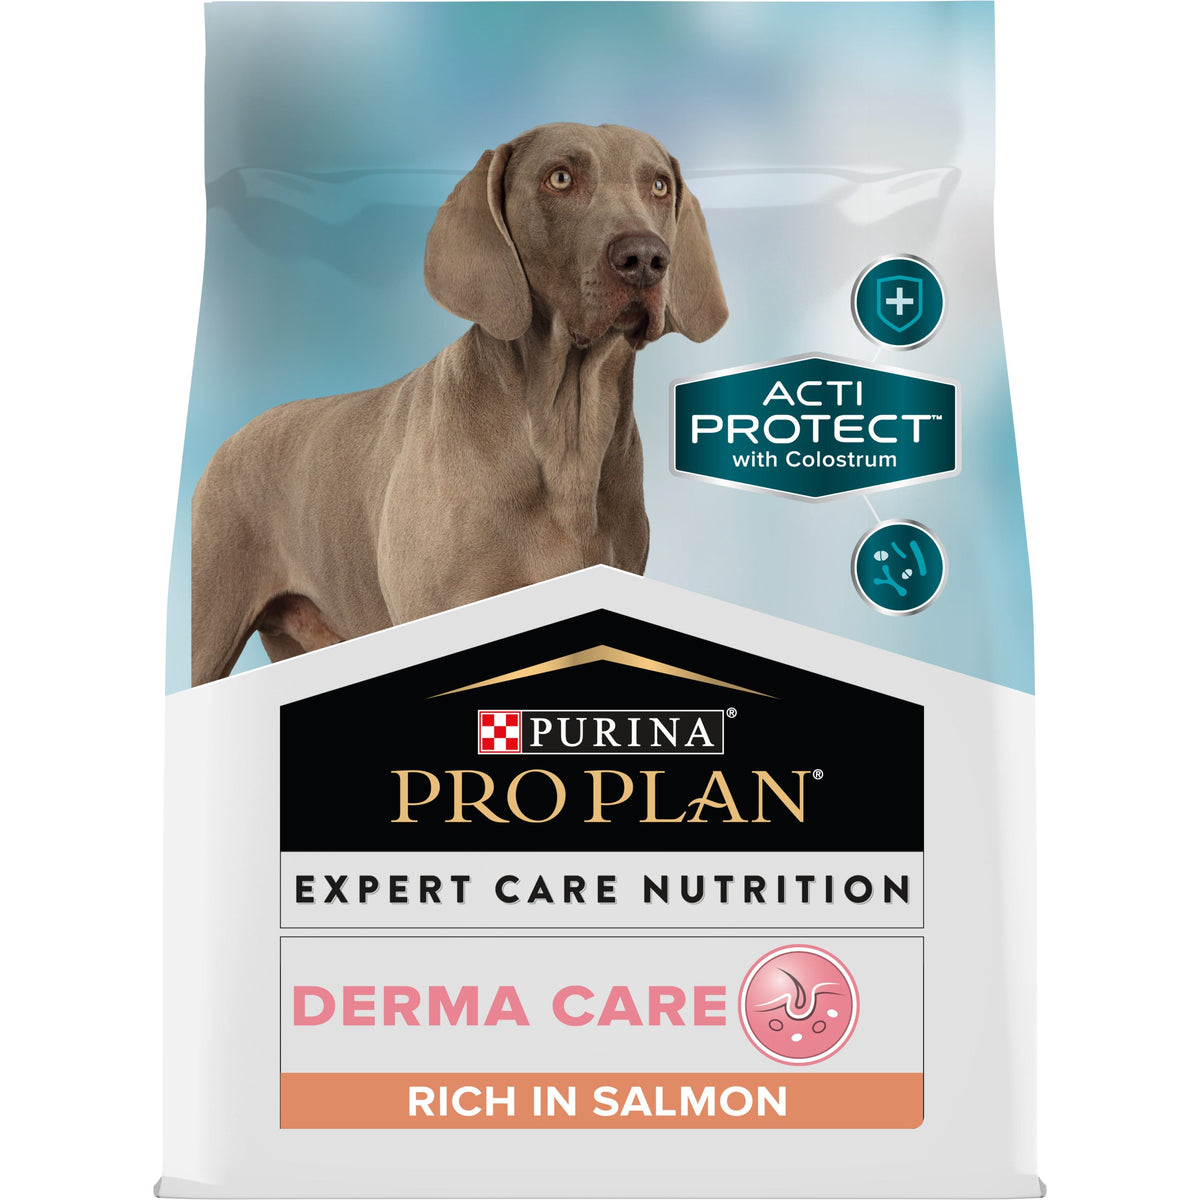 PURINA® PRO PLAN® Expert Care Nutrition - Canine Adult Derma Care - Salmon 10kg